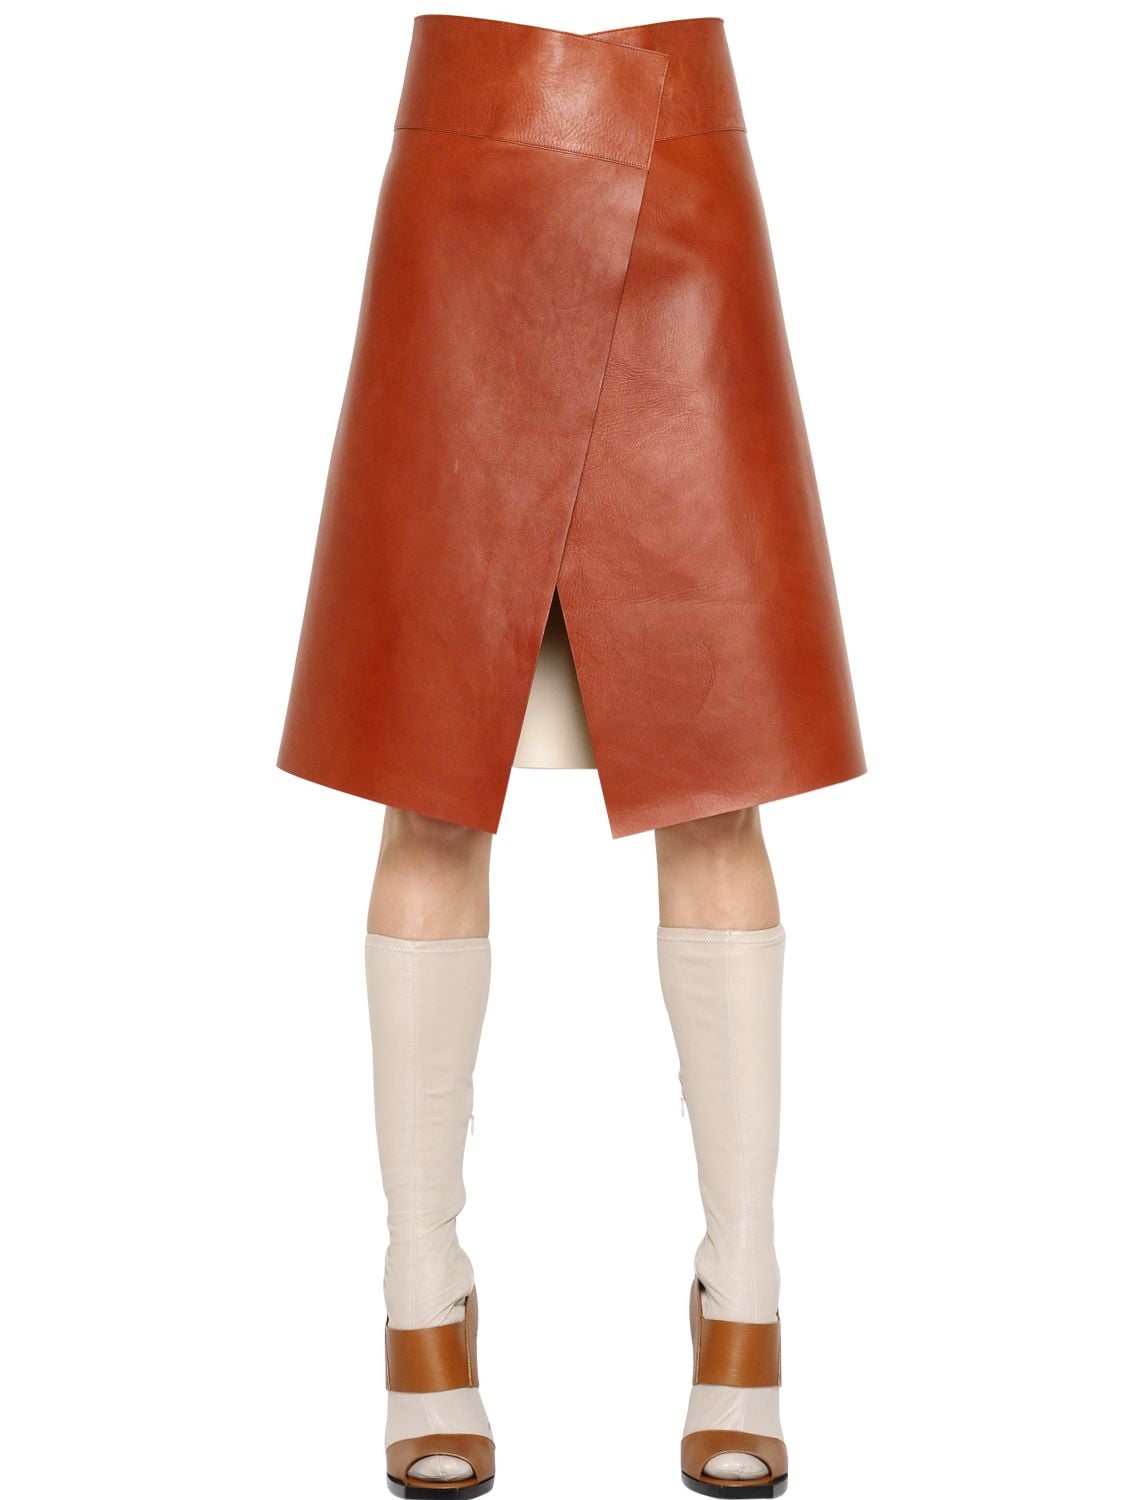 Jil Sander Bonded Nappa Skirt ($3,490) | 34 Wrap to Get All Tied Up in This Spring | POPSUGAR Fashion Photo